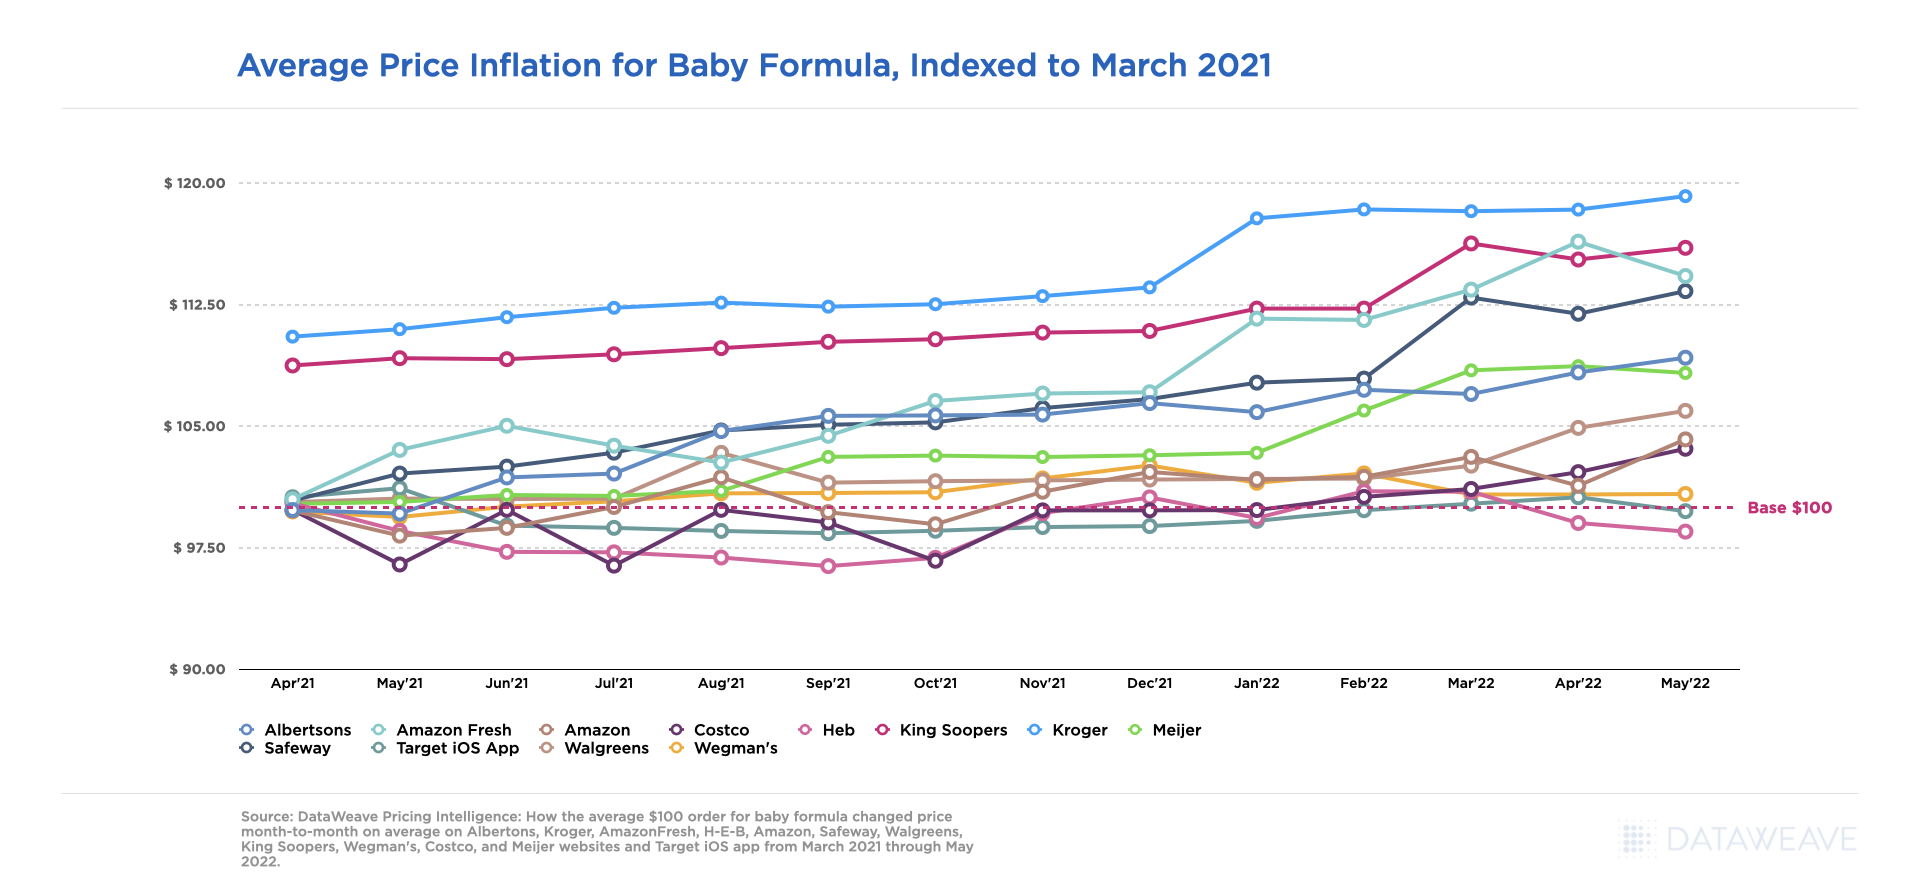 Average Price Inflation for Baby Formula, Indexed to March 2021